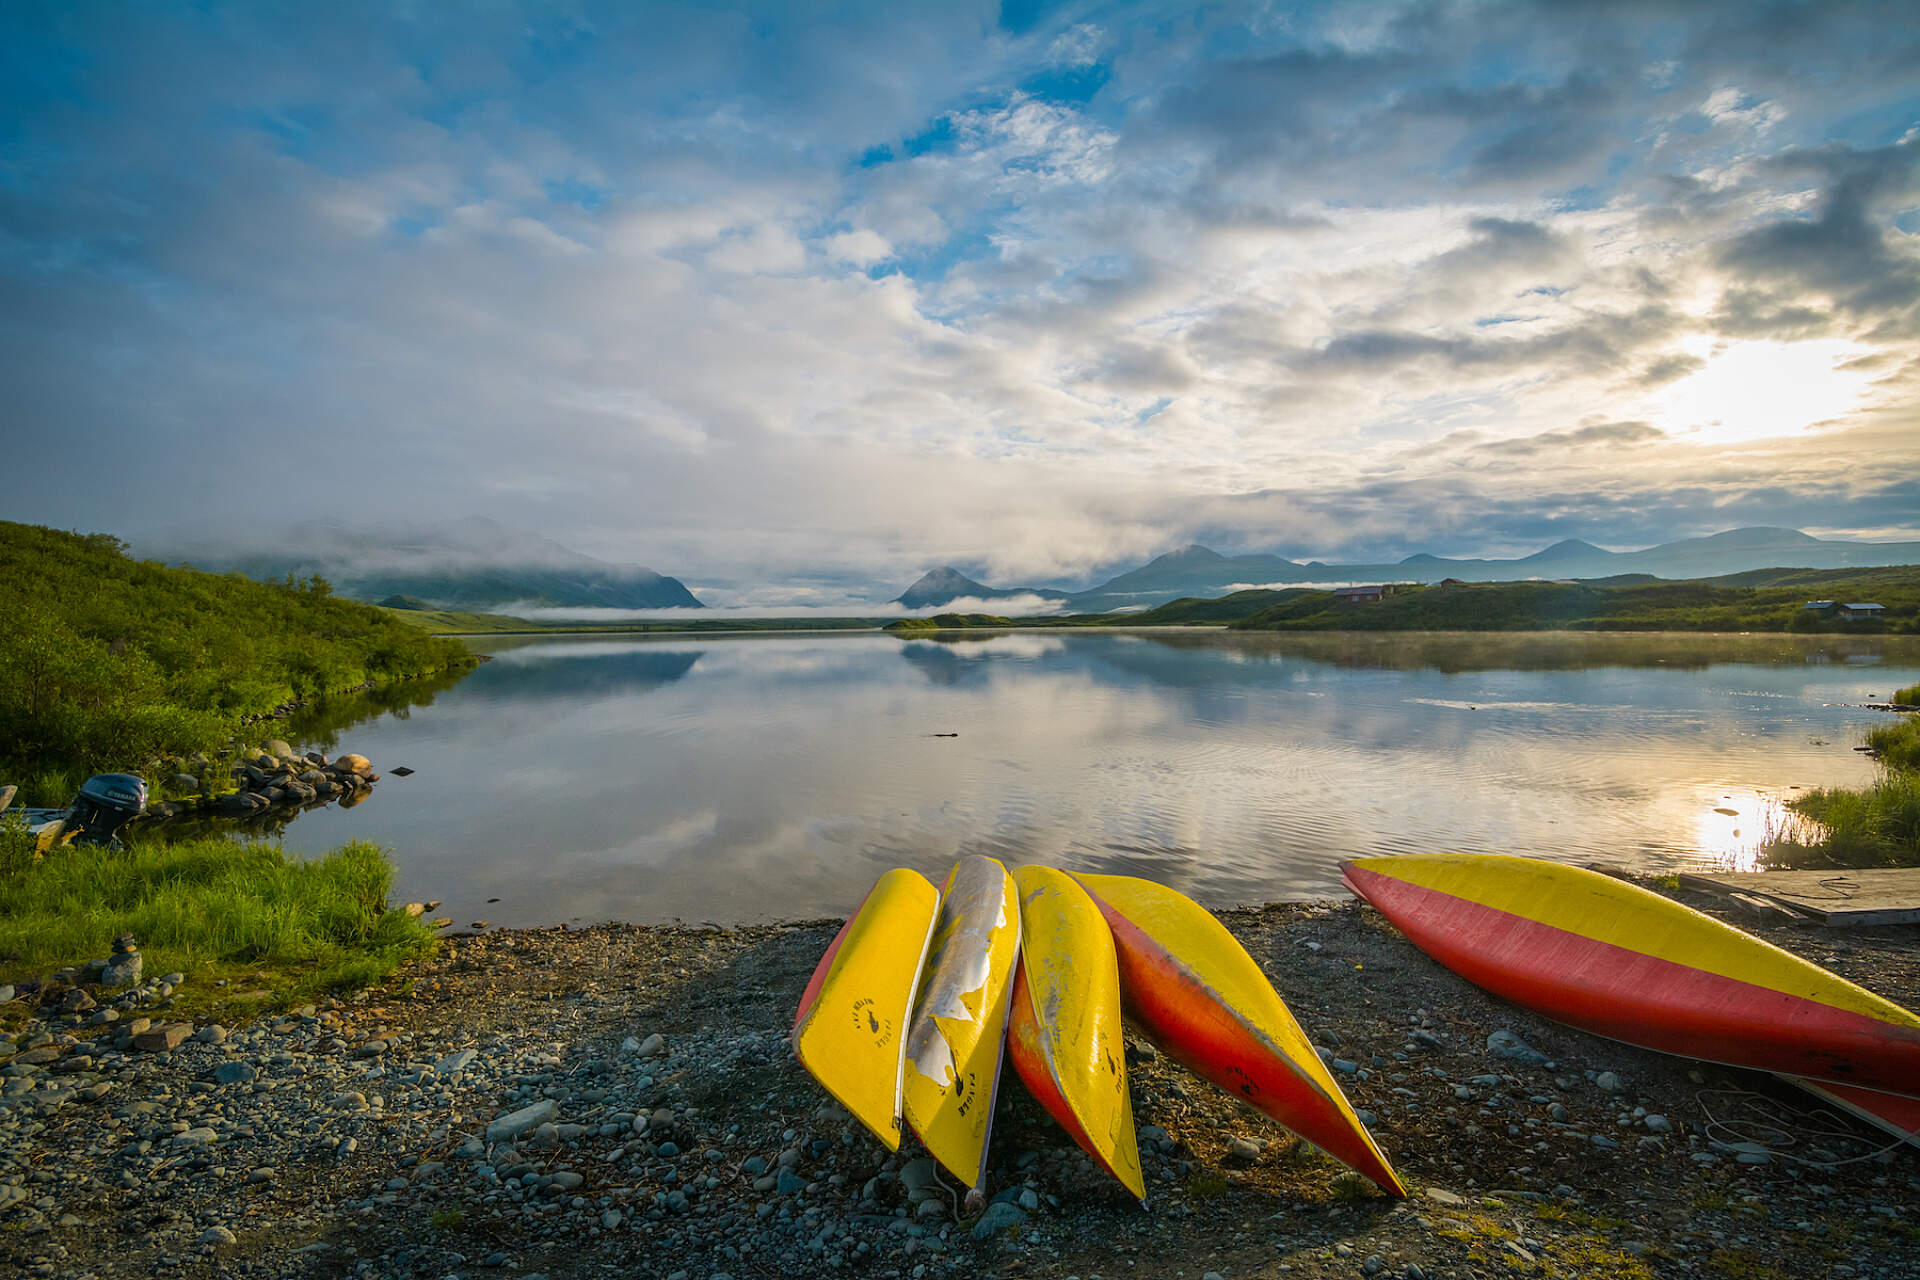 A row of canoes line a lake in Alaska.